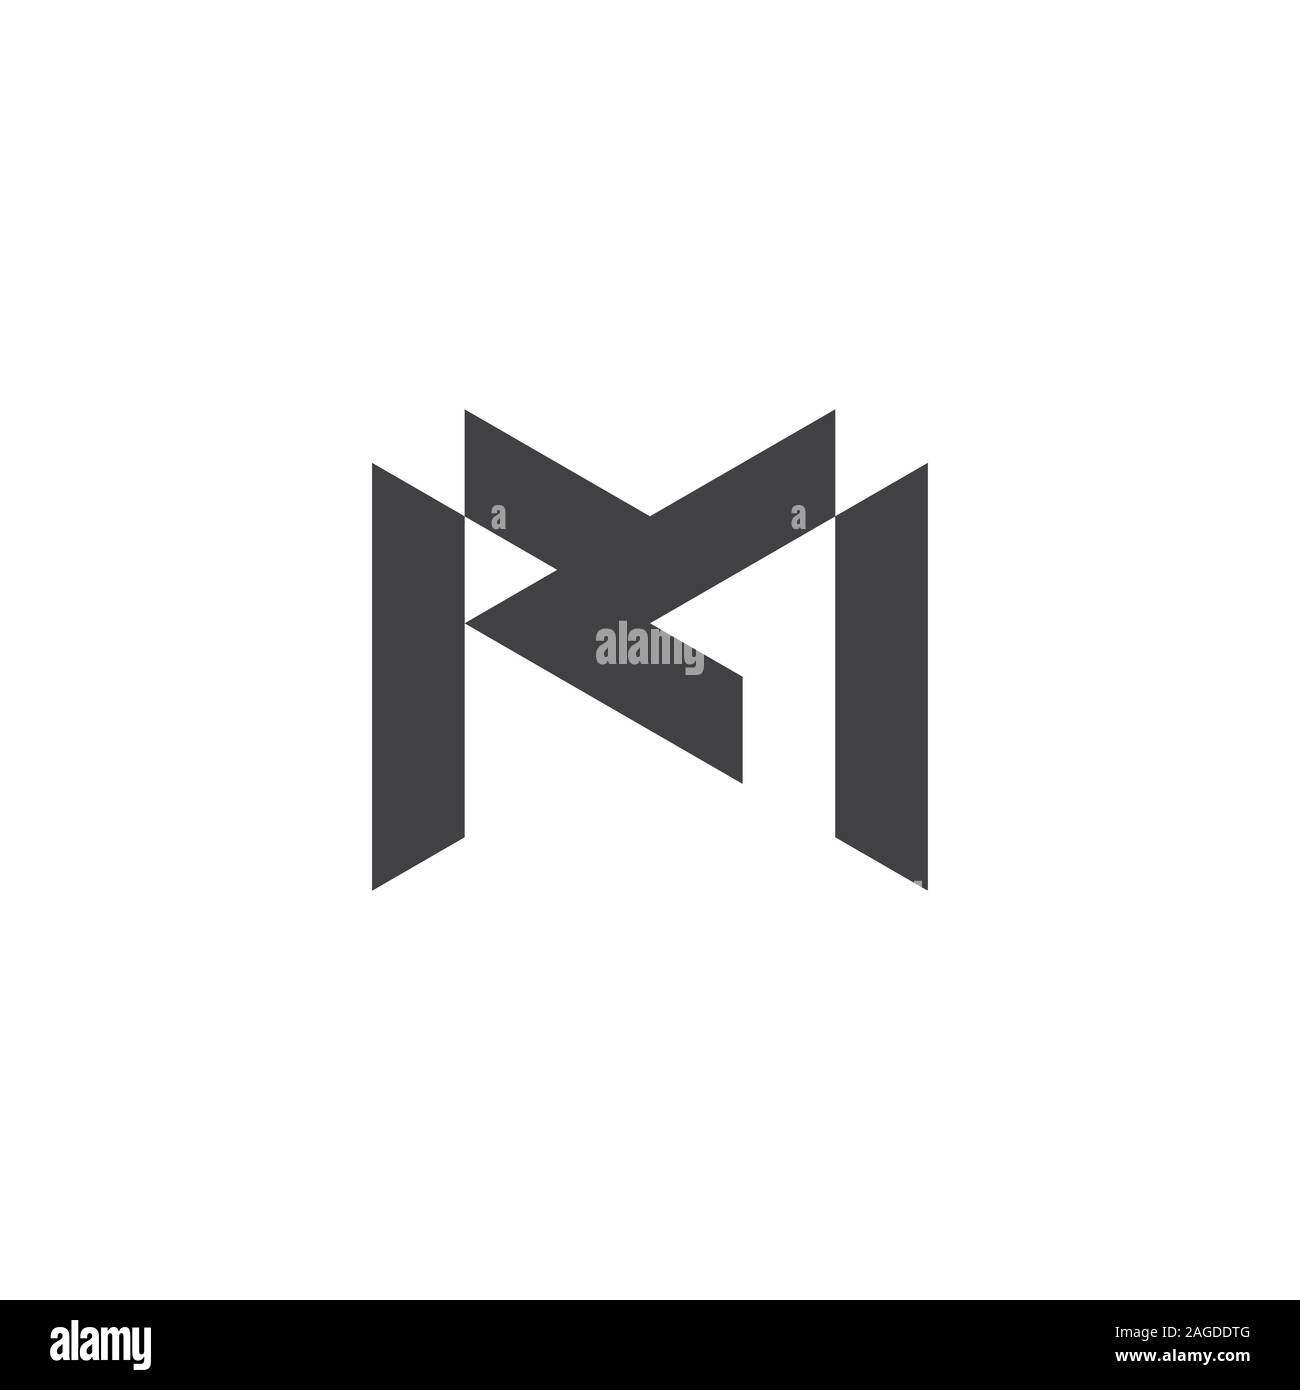 Letter mk logo Black and White Stock Photos & Images - Alamy